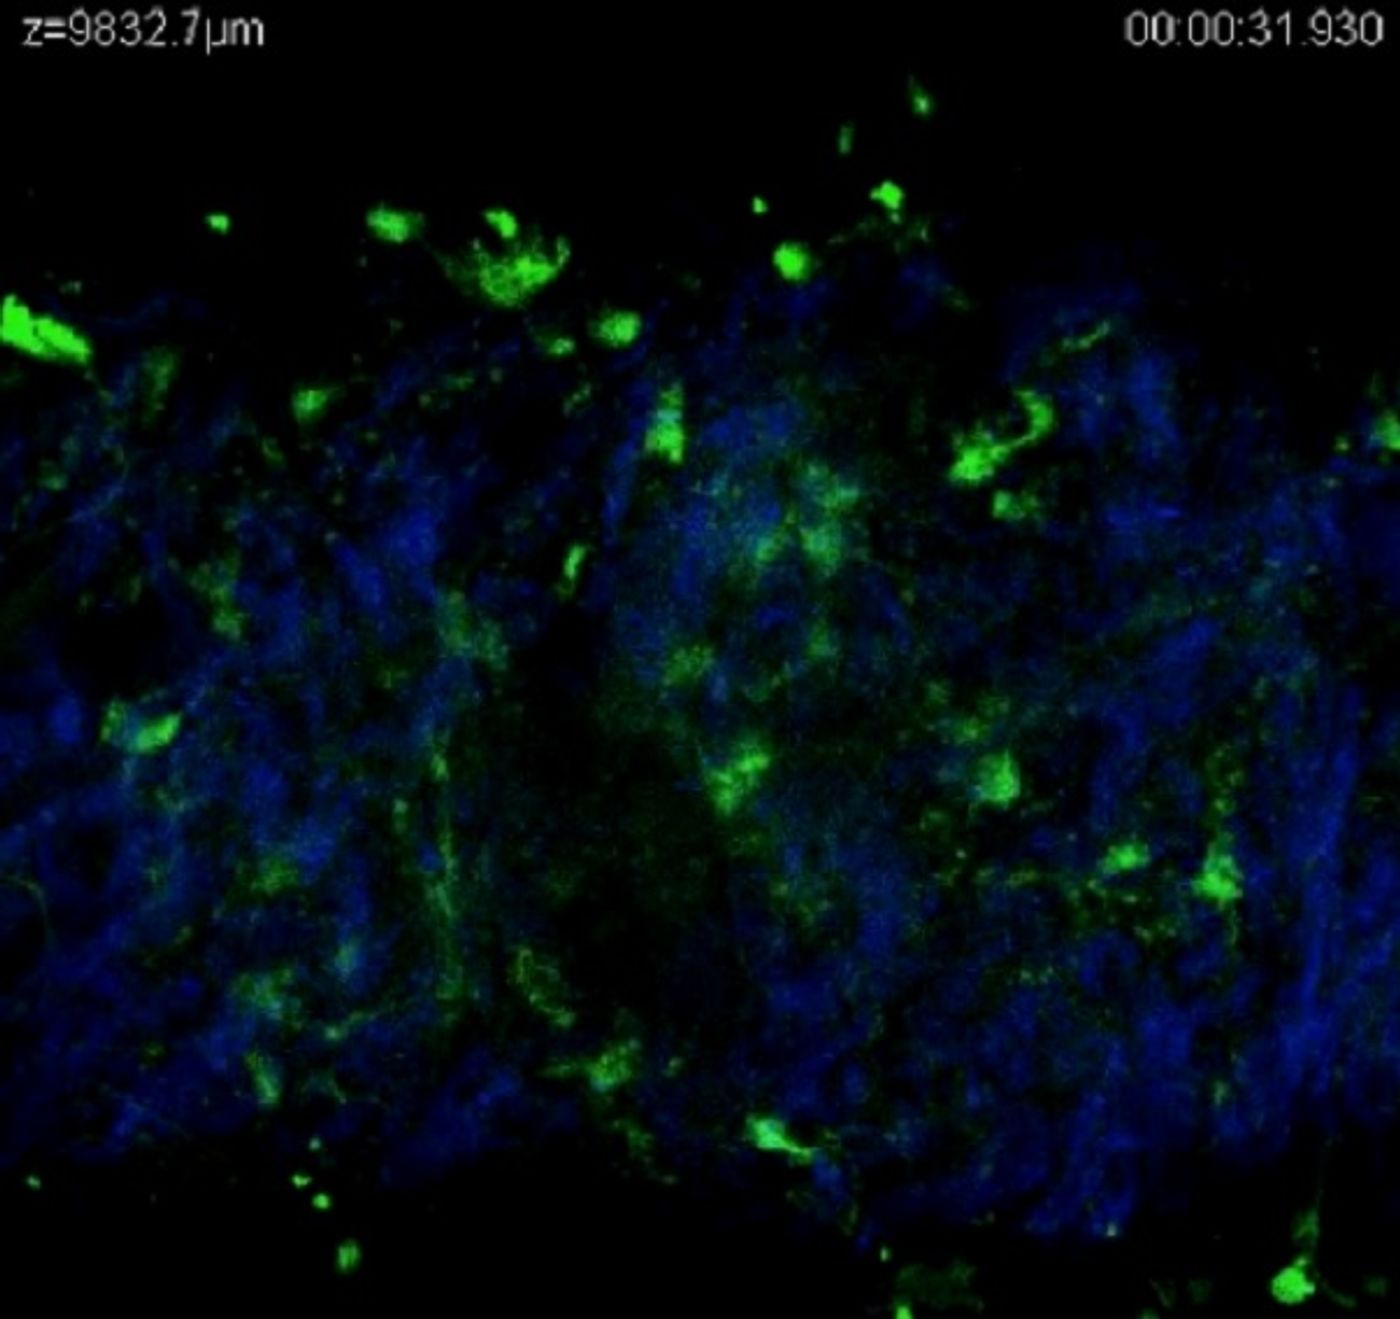 Nitric oxide (green) signaling in various layers of a blood vessel. Credit: PLOS ONE